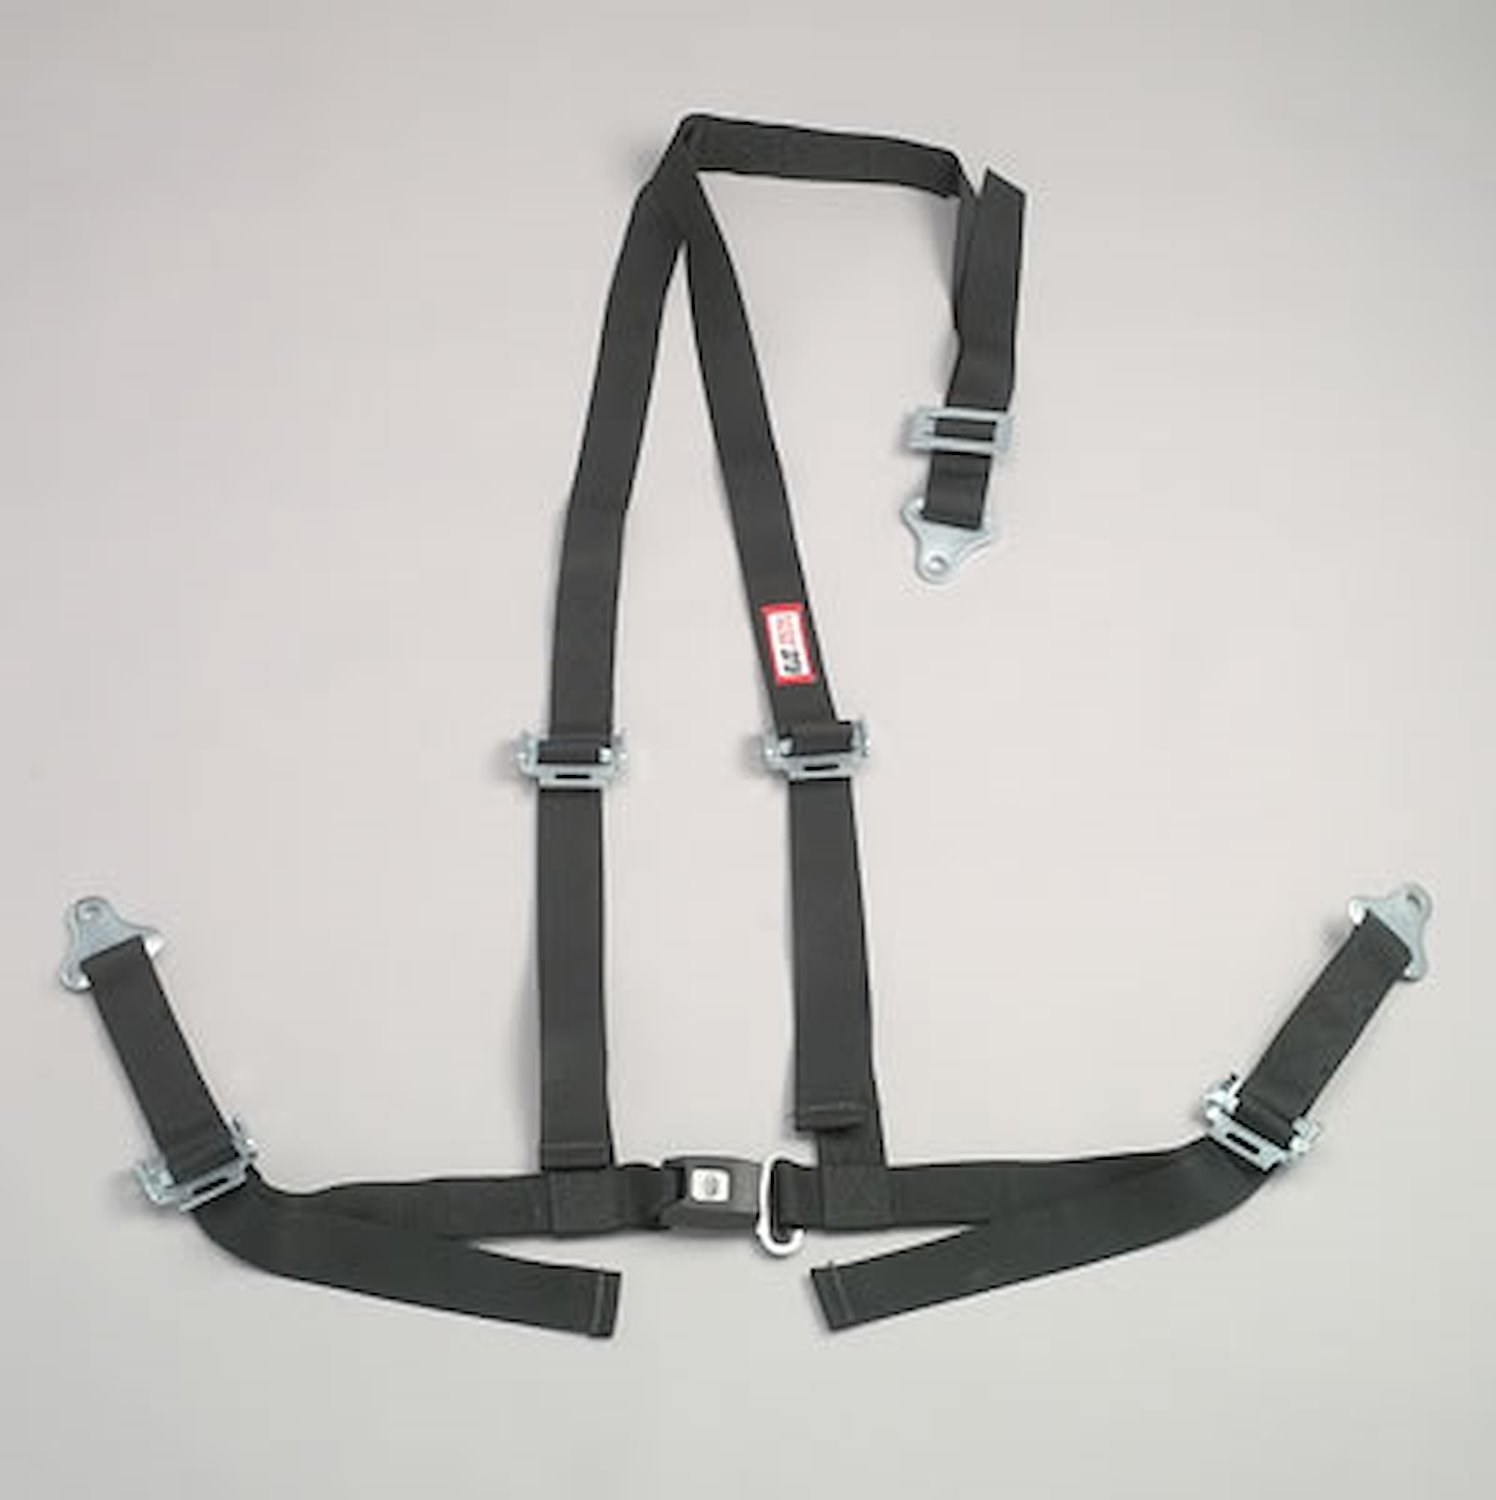 NON-SFI B&T HARNESS 2 PULL DOWN Lap Belt SNAP 2 S. H. Y FLOOR Mount WRAP/SNAP w/STERNUM STRAP RED